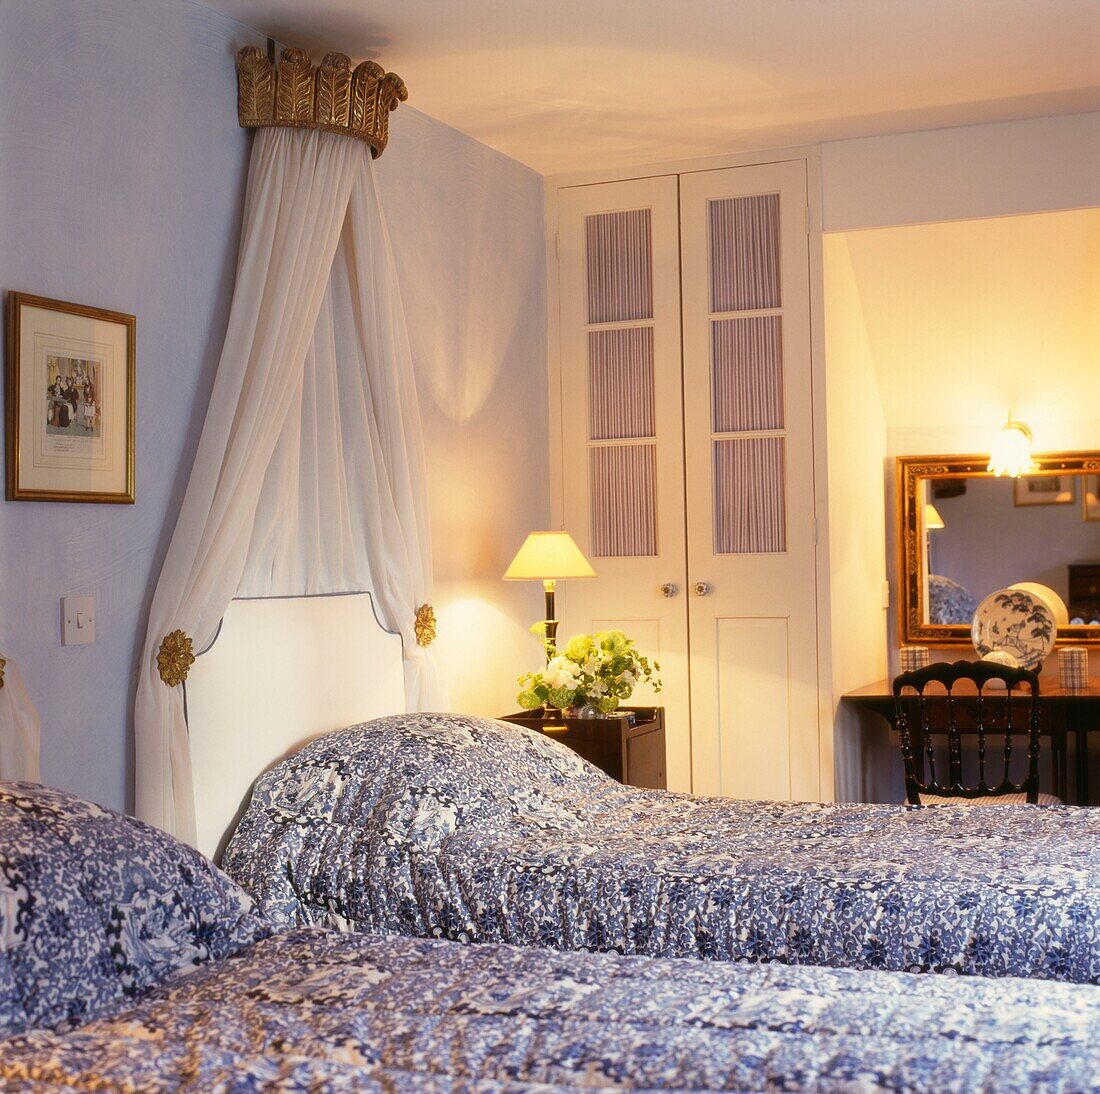 Twin beds with canopy and lit lamps in pastel blue bedroom 